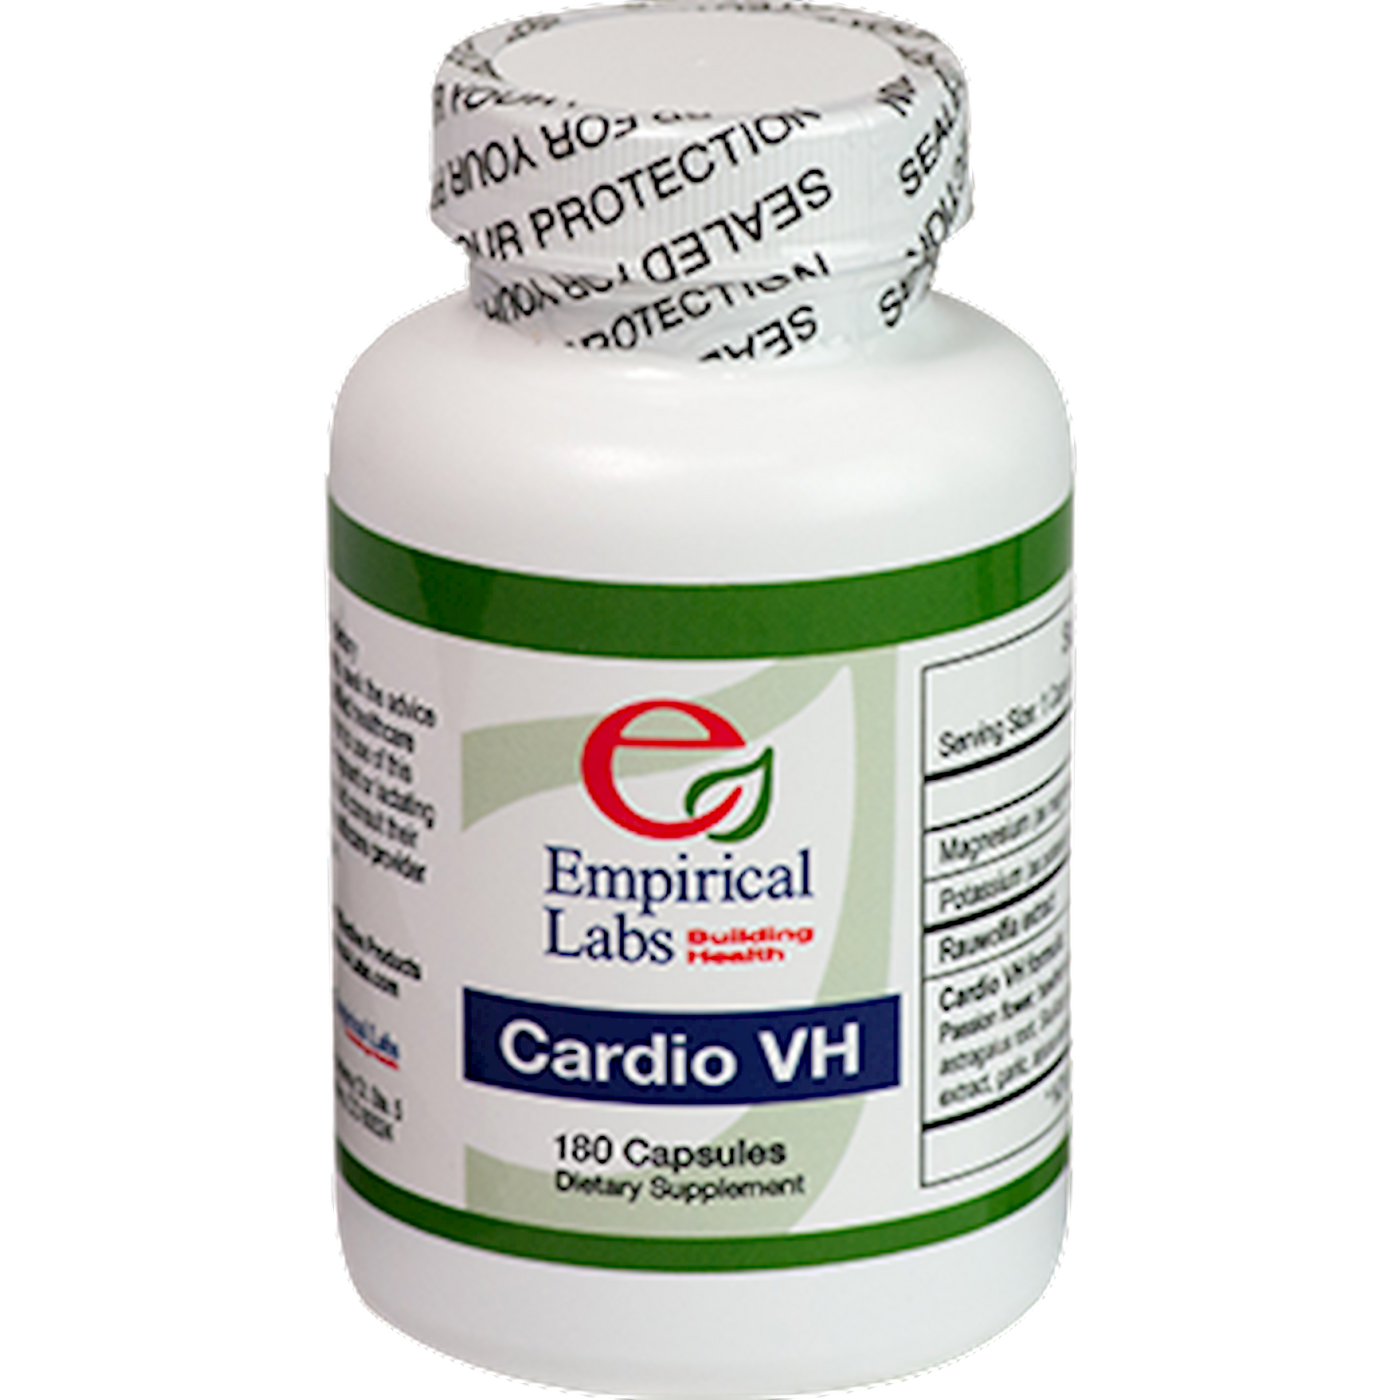 Cardio VH  Curated Wellness